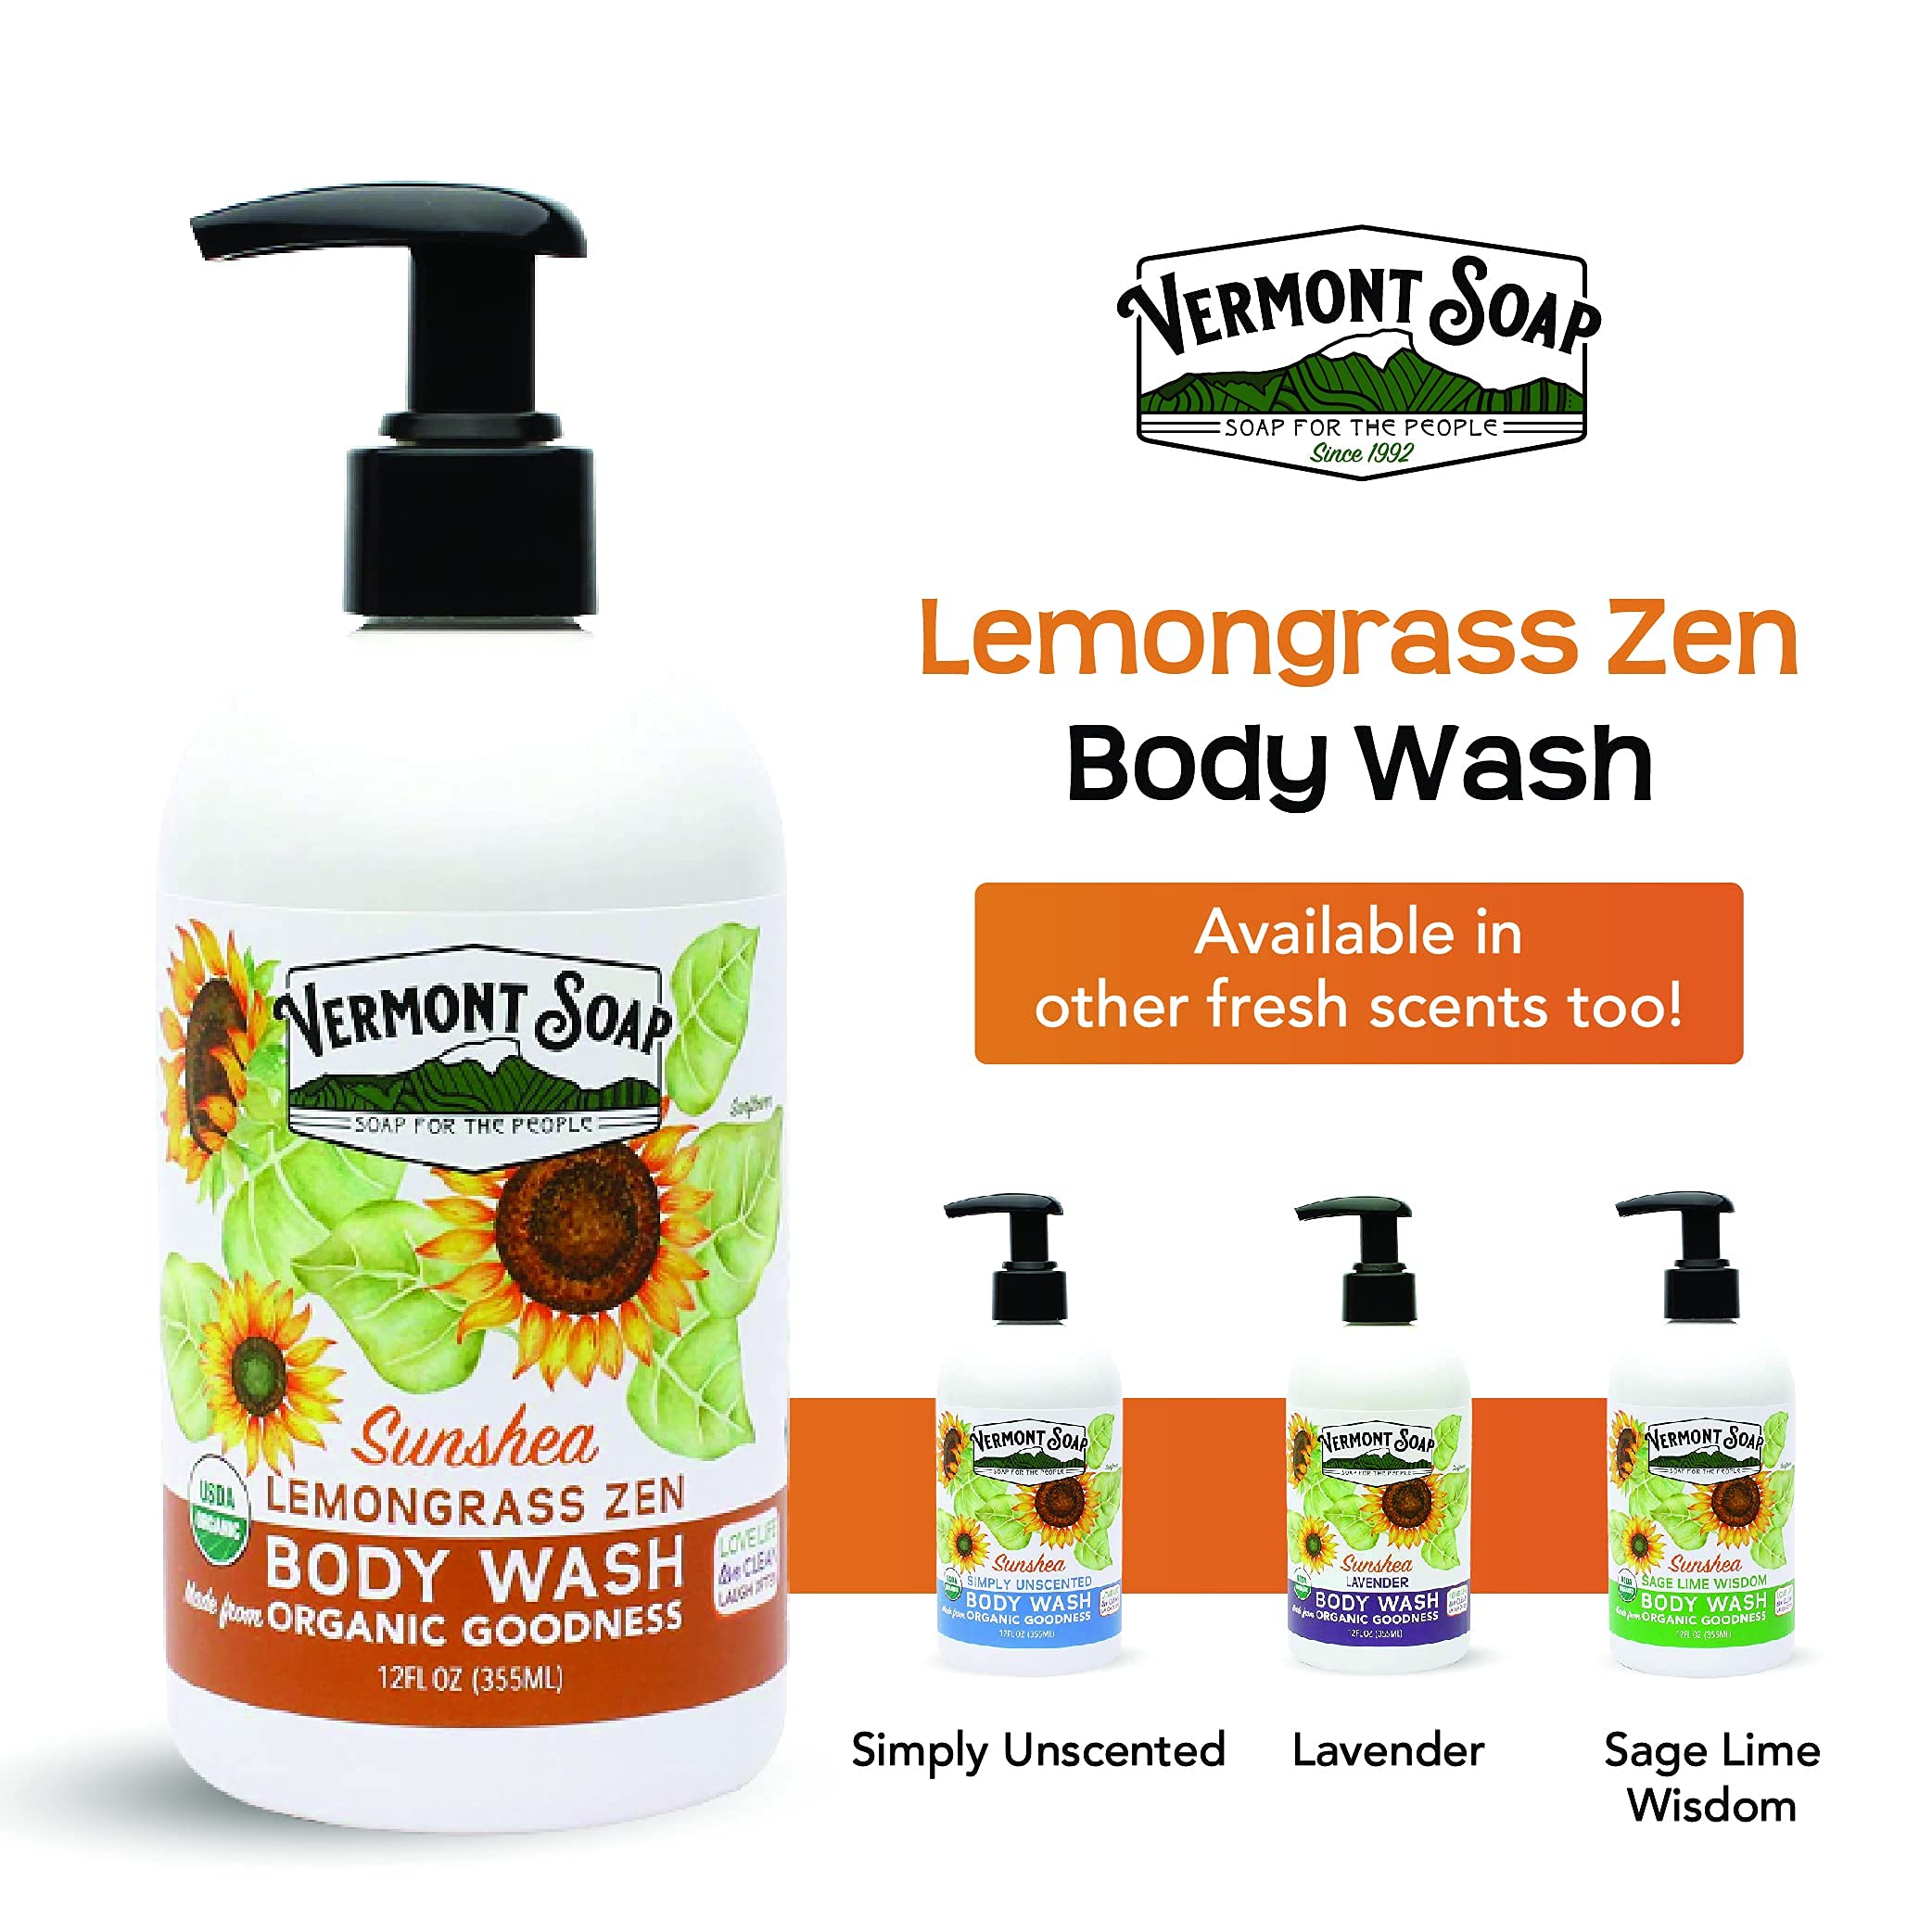 VERMONT SOAP Body Wash, Natural Body Wash with Shea Butter, Mild Gel Body Wash for Moisturizing and Soothing Skin, Fragrance Free Body Wash for Women & Men (Lemongrass Zen, 12oz)